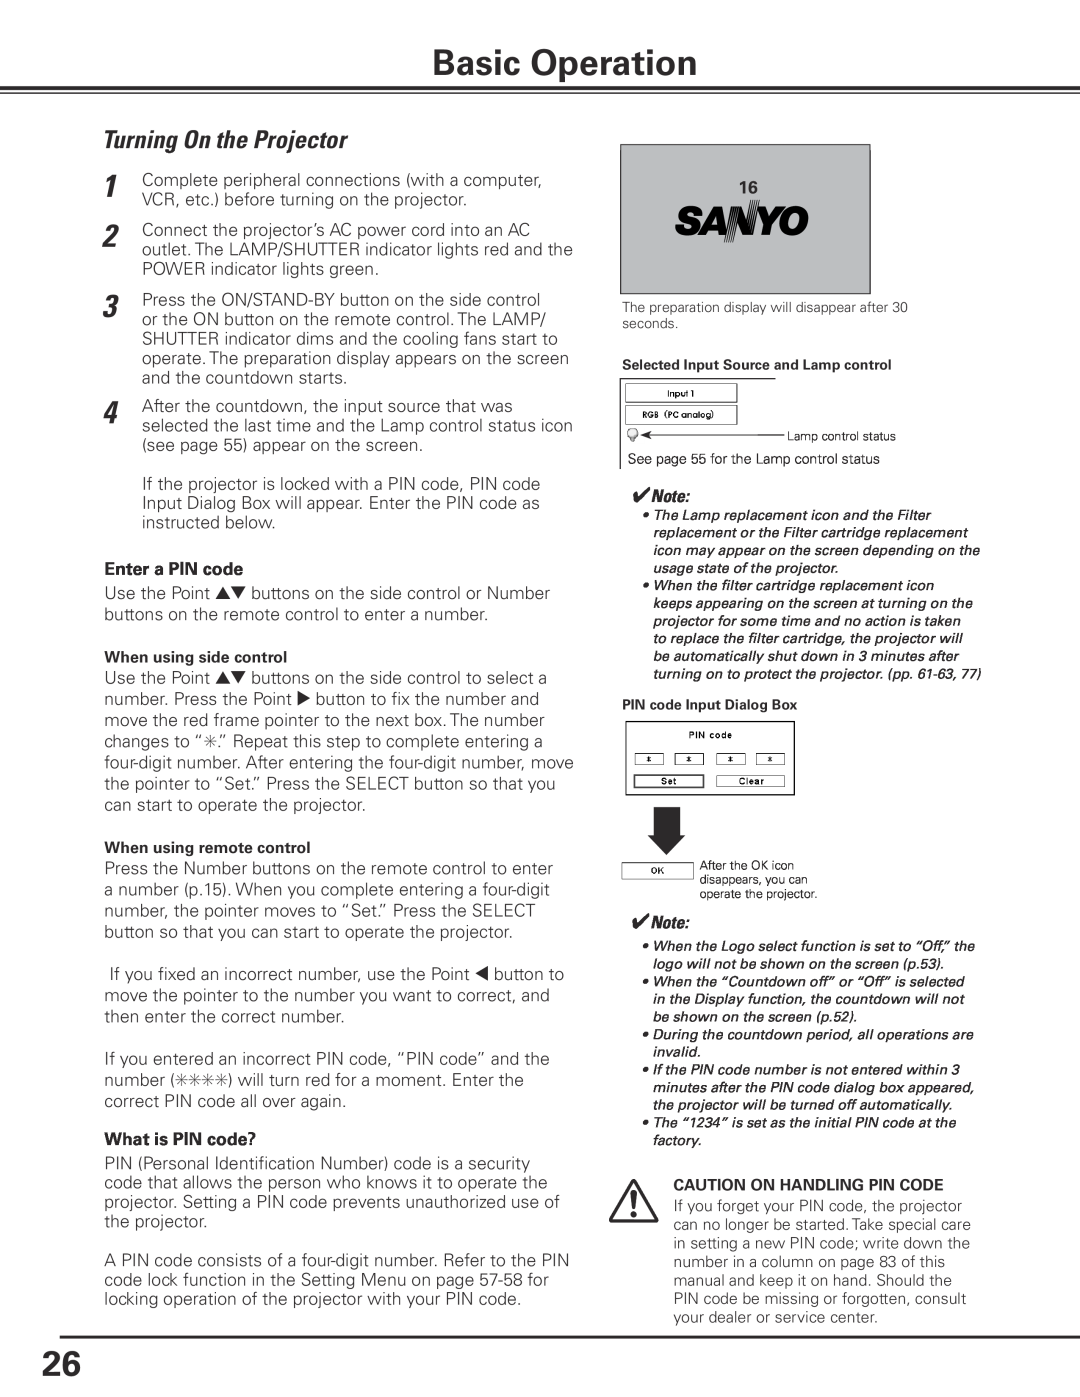 Sanyo PLC-XP200L owner manual Basic Operation, Turning On the Projector 